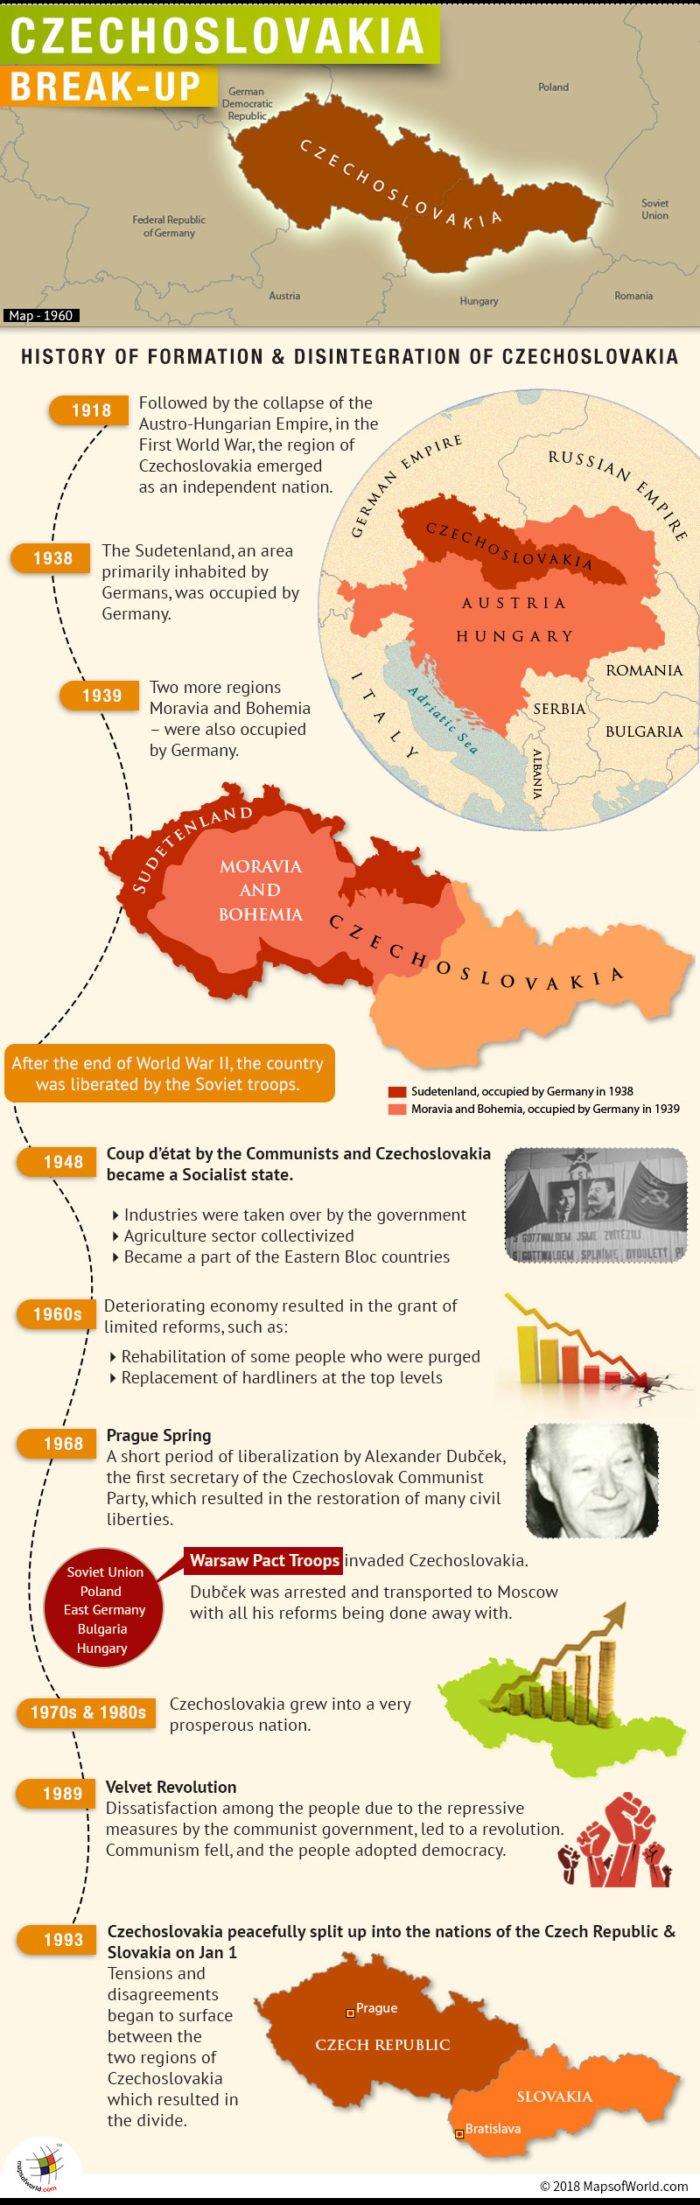 Infographic on Czechoslovakia, its history and disintegration